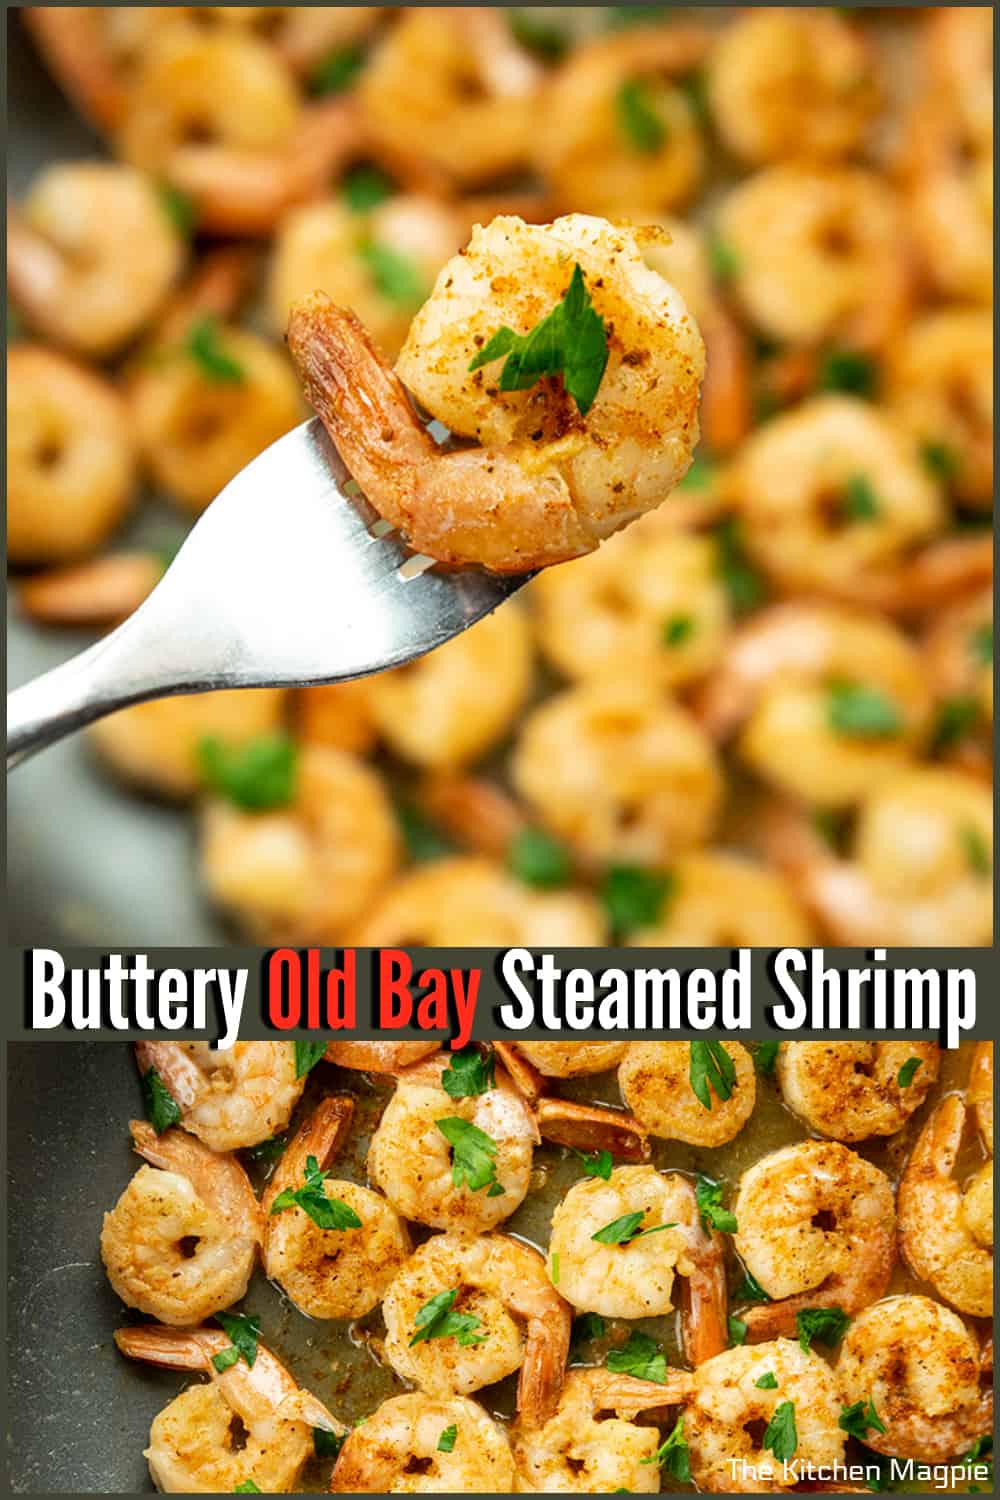 Nothing beats steamed shrimp with Old Bay seasoning! This method of cooking shrimp makes for a fast and easy dinner! #shrimp #oldbay #dinner